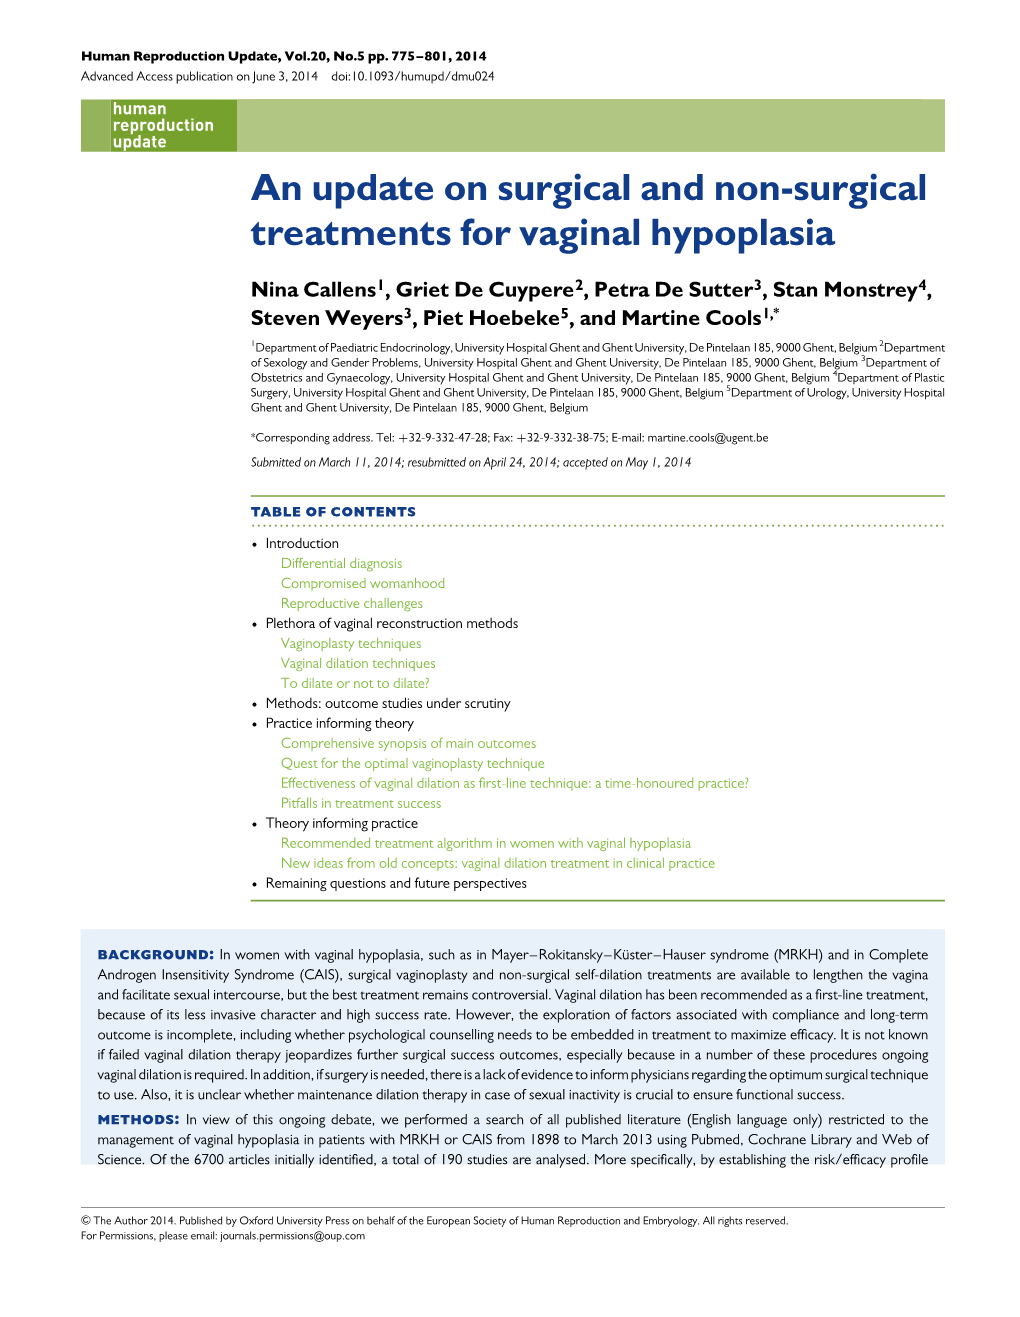 An Update on Surgical and Non-Surgical Treatments for Vaginal Hypoplasia